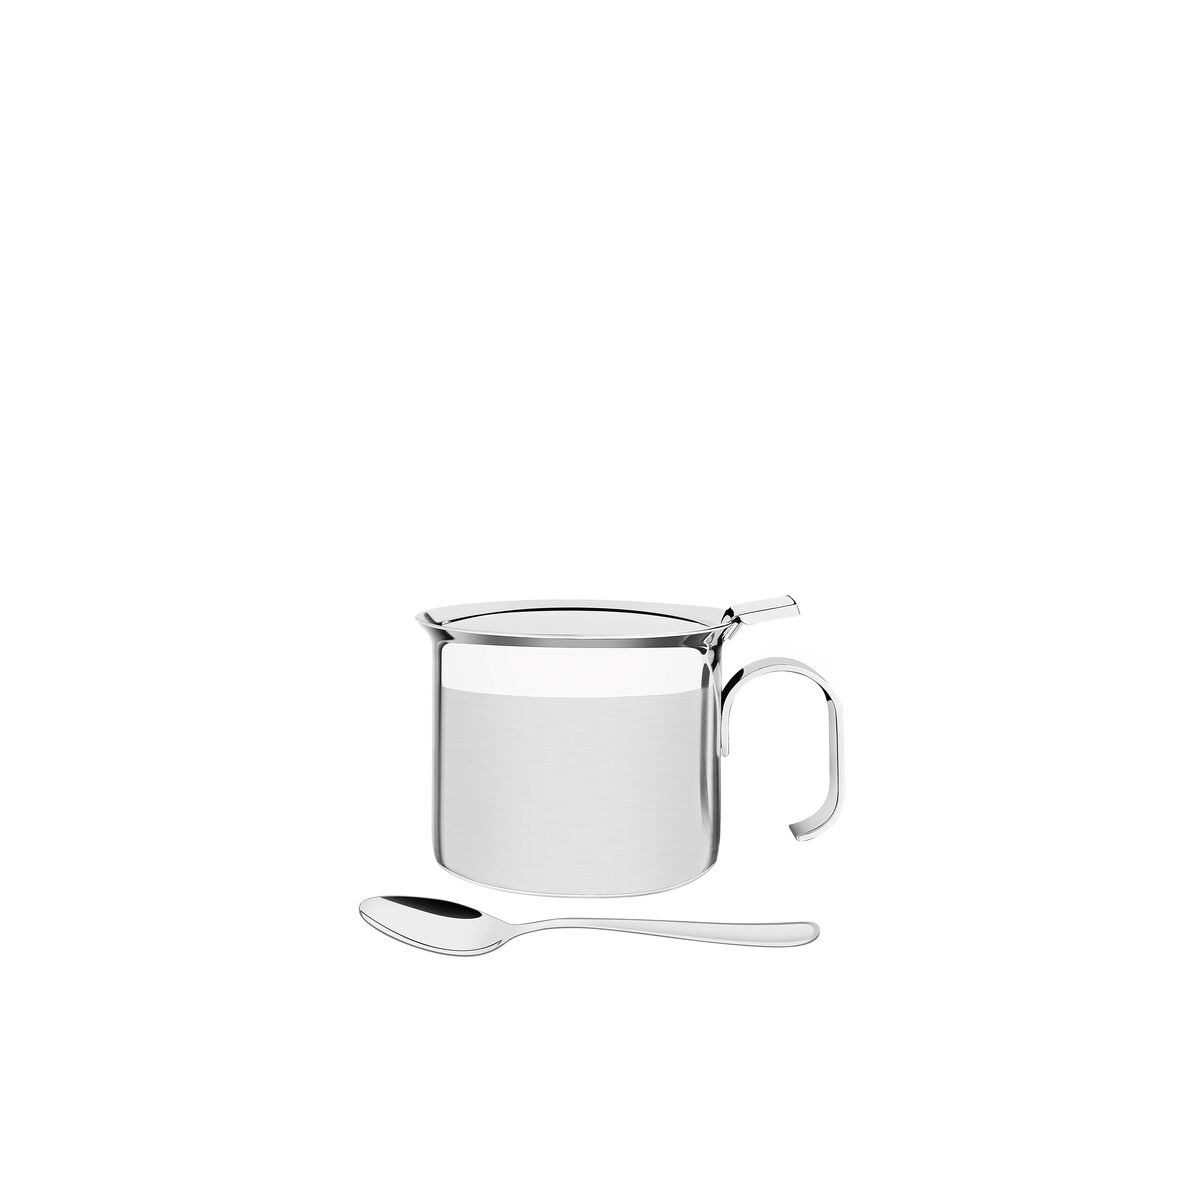 Tramontina Buena stainless steel sugar bowl with handle, spoon and shiny detailing, 8 cm and 350 ml